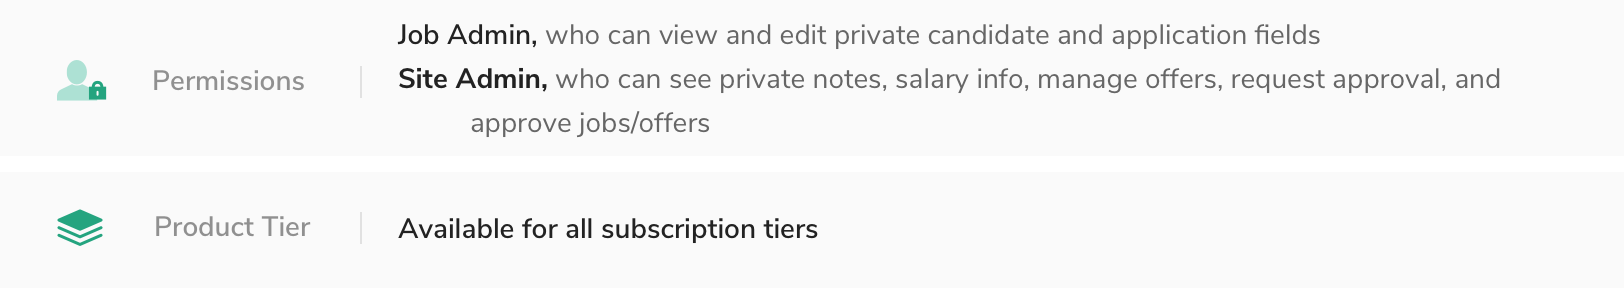 private_candidate_fields_-_all_tiers.png